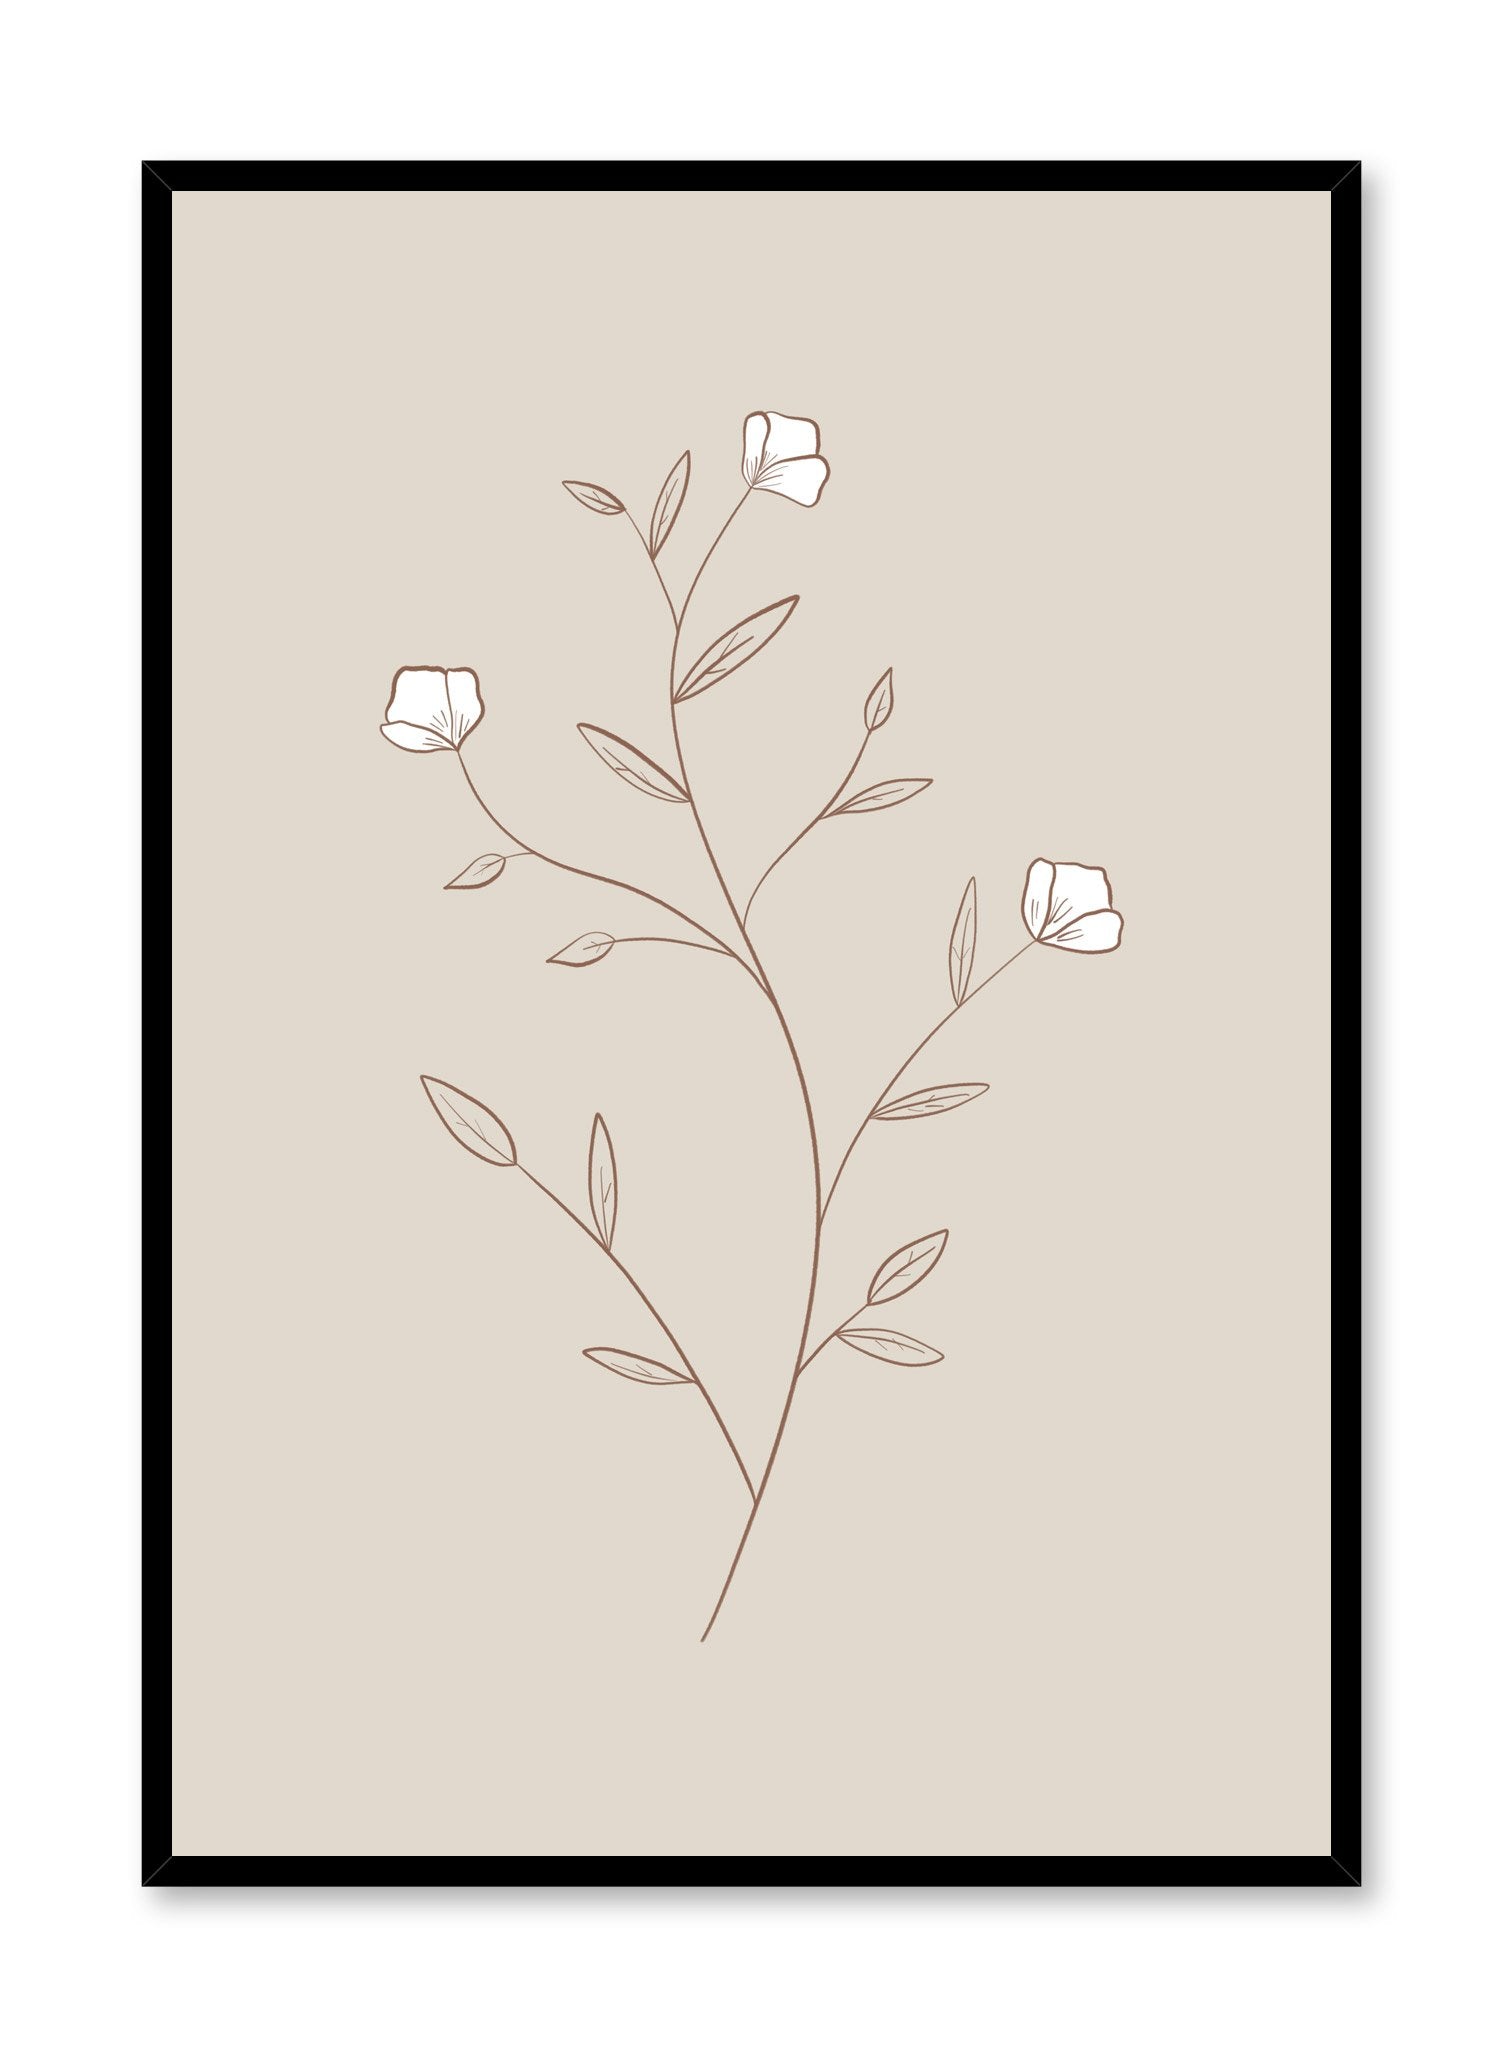 Modern minimalist botanical illustration poster by Opposite Wall with White Petals